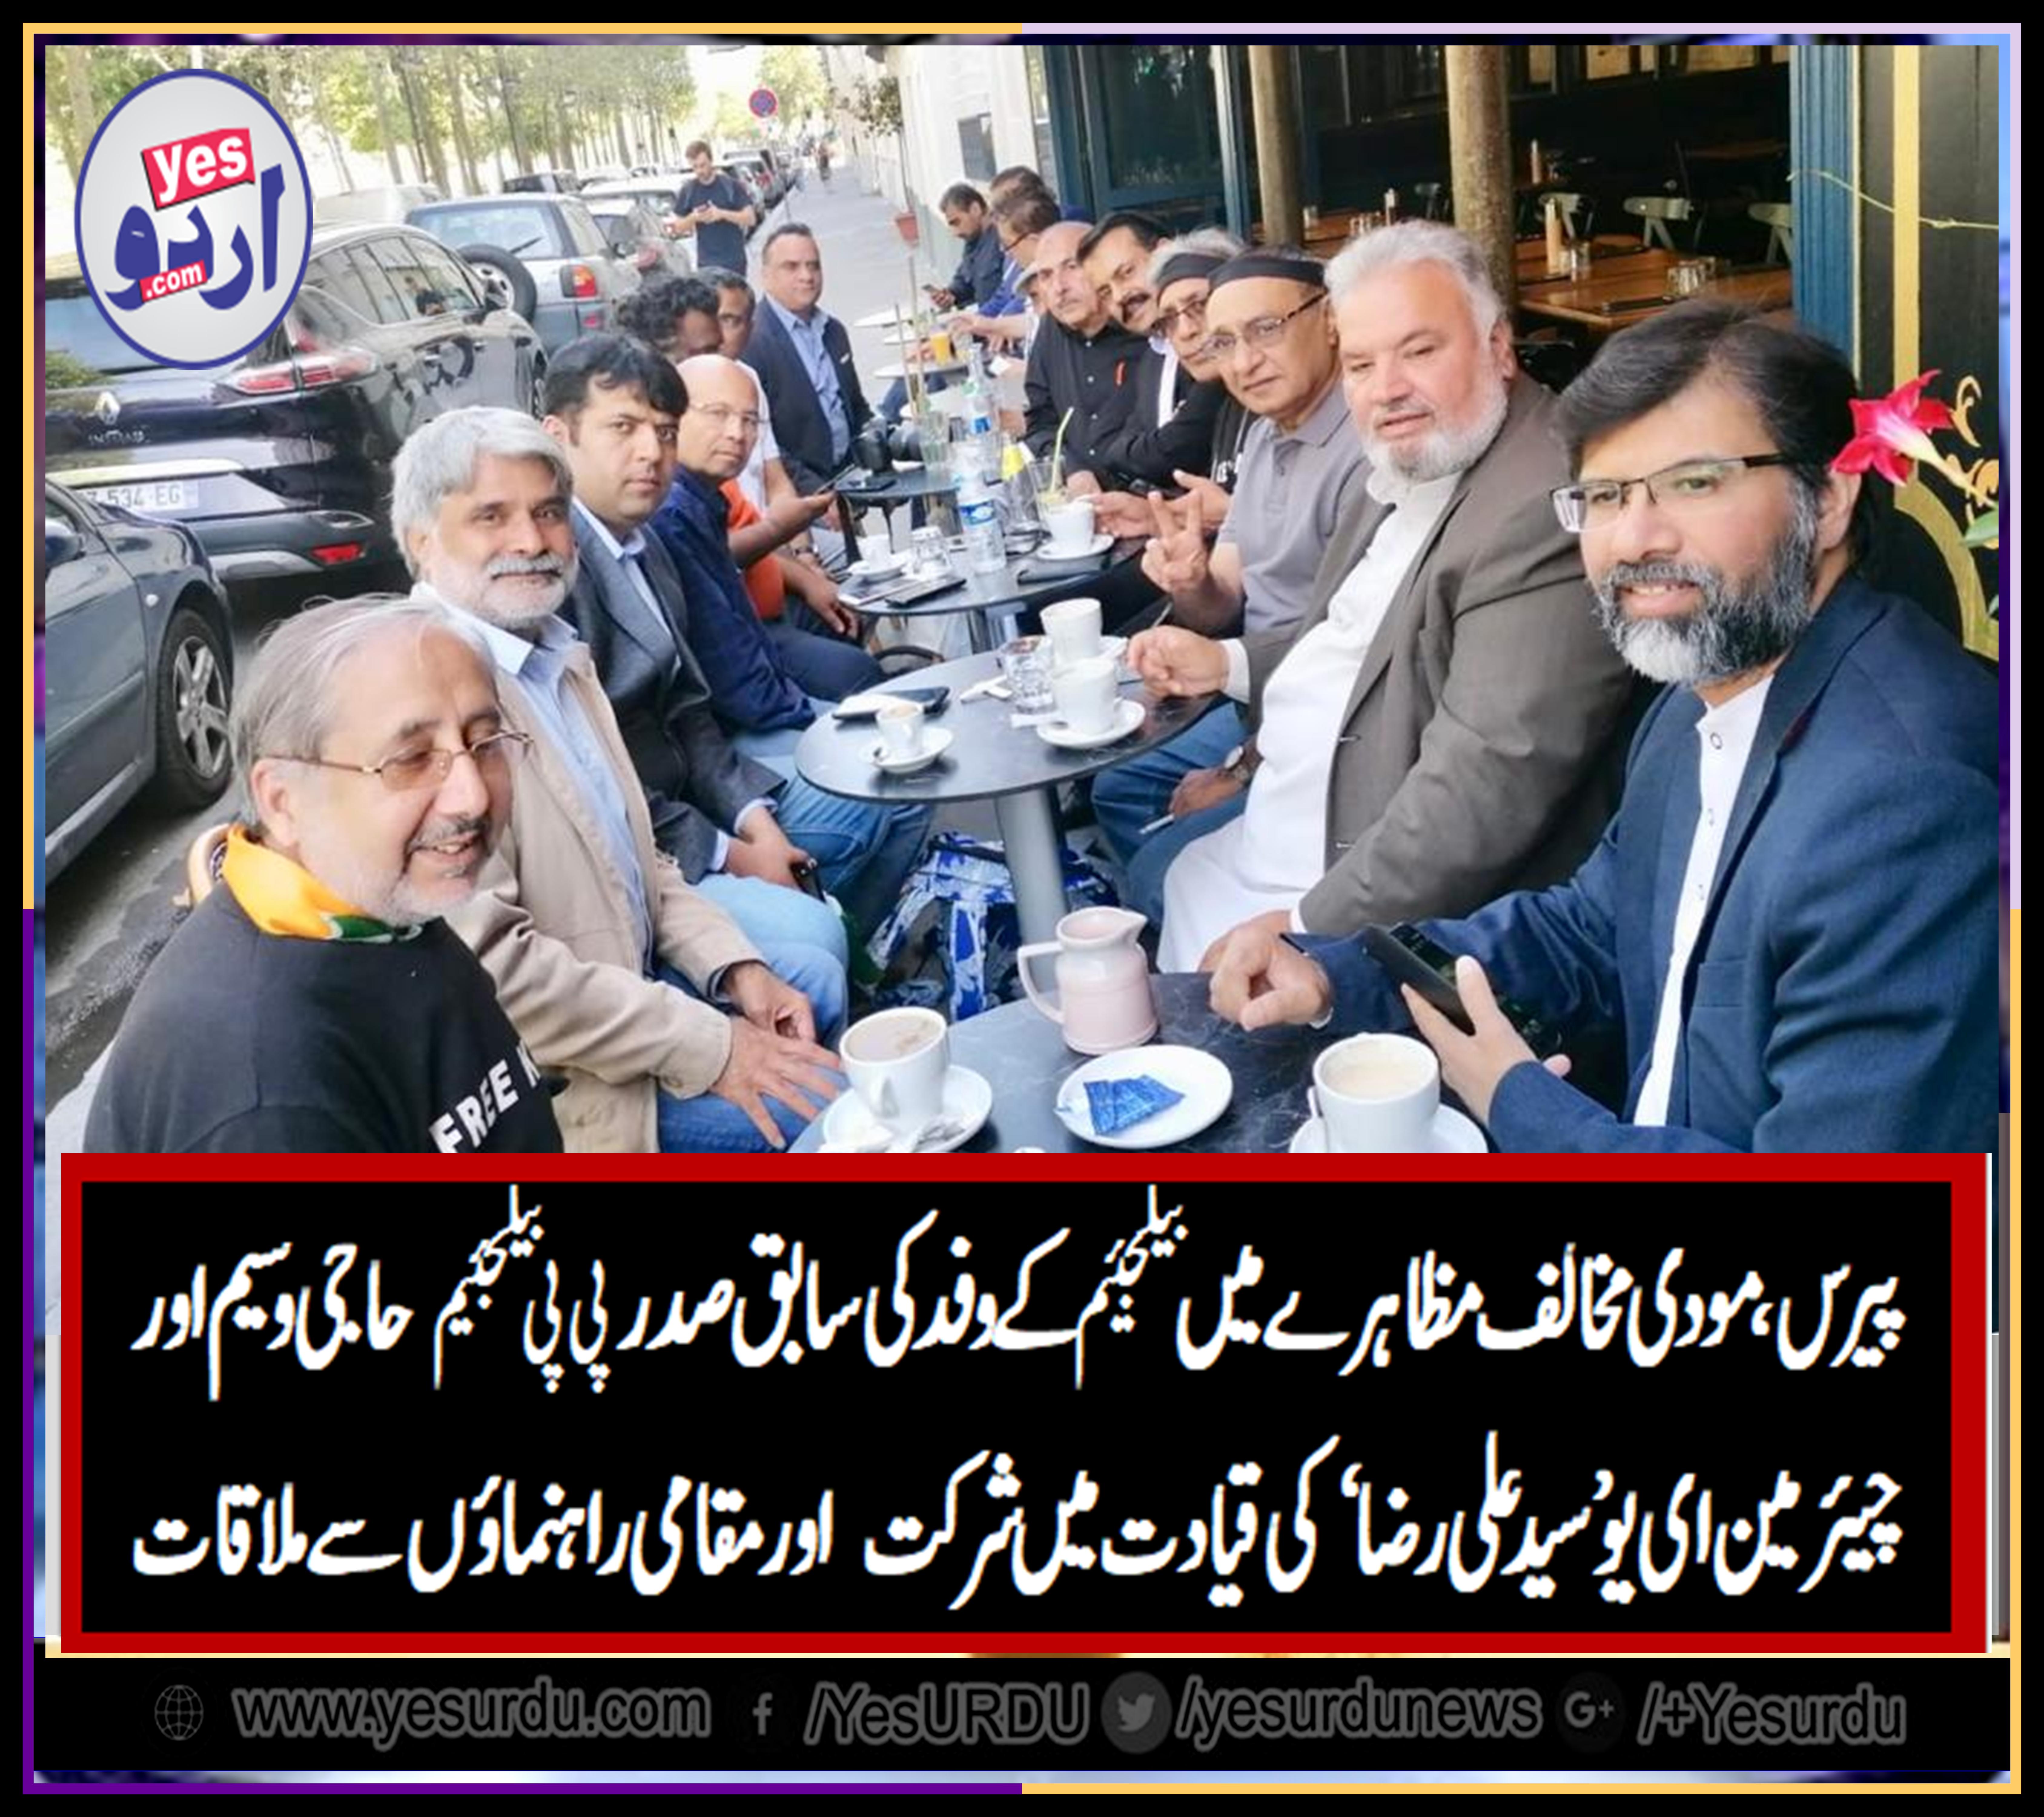 a, delegation, under, supervision, of, chairman, EU, syed Ali Raza and, Ex-President, PPP, Belgium, Haji Waseem, participated, in, protest, against, Indina, PM Modi, at, Paris